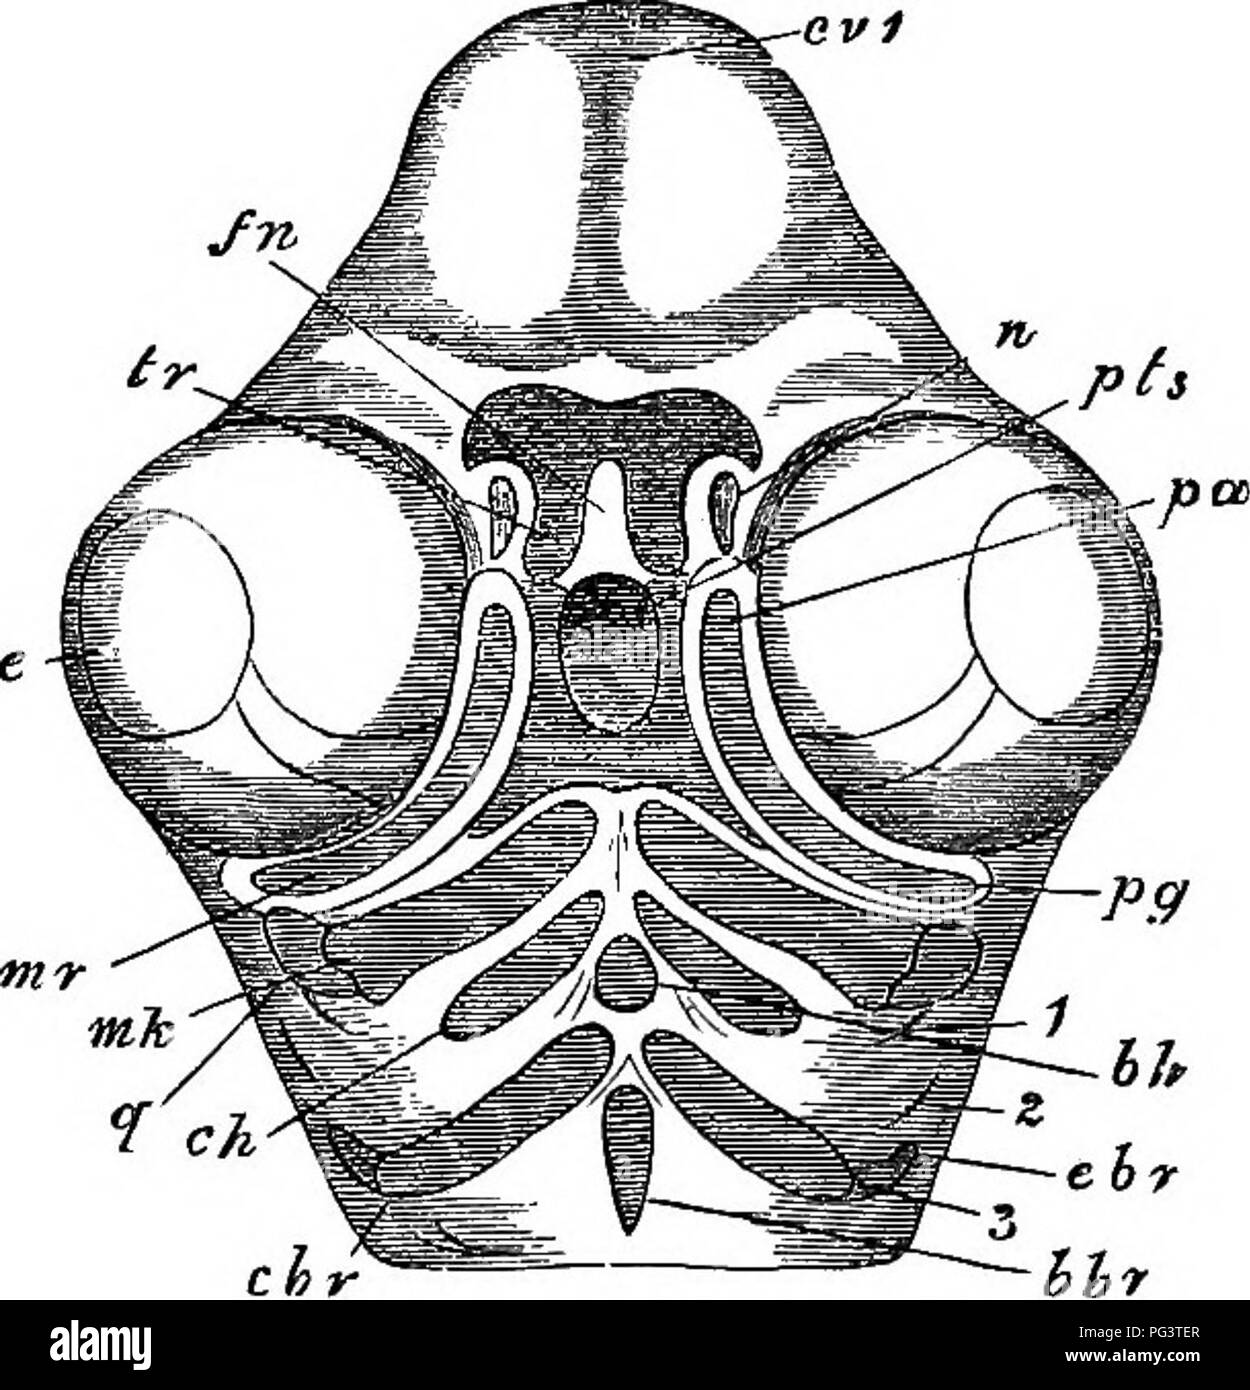 . The elements of embryology . Embryology. 244 THE FIFTH DAT. [CHAP. Meckel's cartilage (Fig. 79, mk); it soon becomes covered by investing (membrane) bones which form the mandible; and its proximal end ossifies as the aHiculare. Fio. 79.. View from below of the Paired Appendages of the Skull OF A Fowl on the Fifth Day of Incubation. (From Parker.) cv. 1. cerebral vesicles, e. eye. fn. fronto-nasal process, n. nasal pit. tr. trabeculse. pts. pitmtary space, mr. superior maxillary process, pg. pterygoid, pa. palatine, q. quad- rate, mk. Meckel's cartilage, ch. cerato-hyal. hh. basi- hyal. dir.  Stock Photo